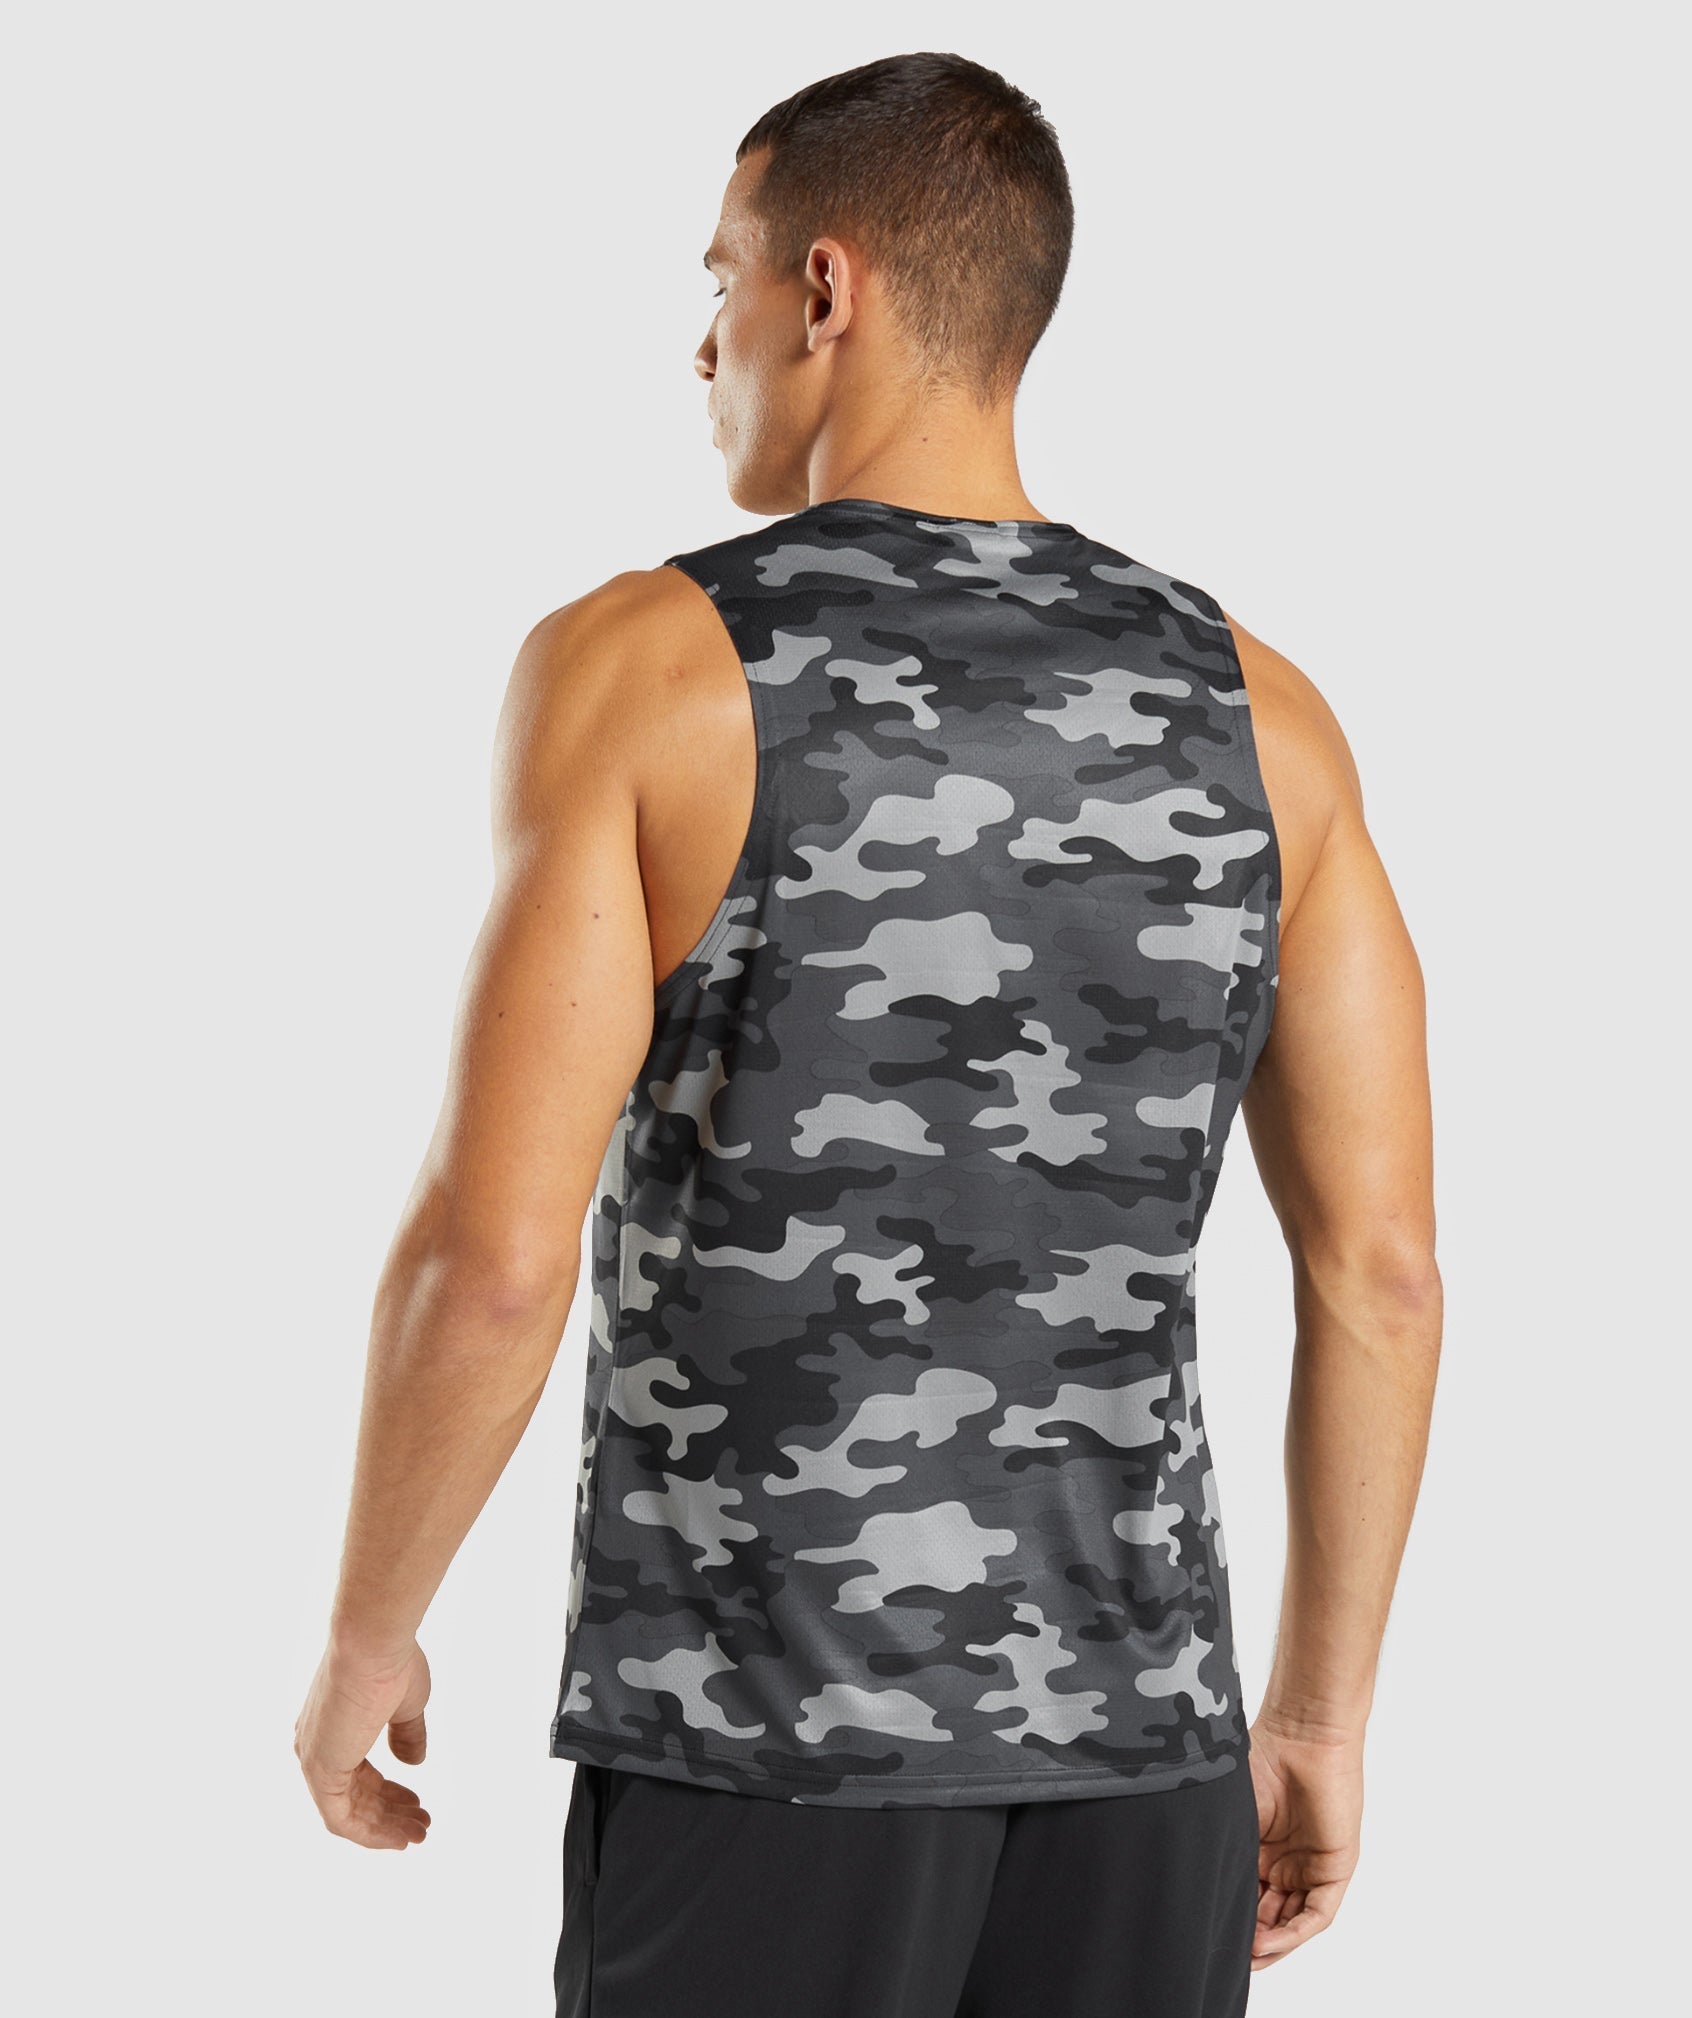 Arrival Tank in Grey Print - view 3